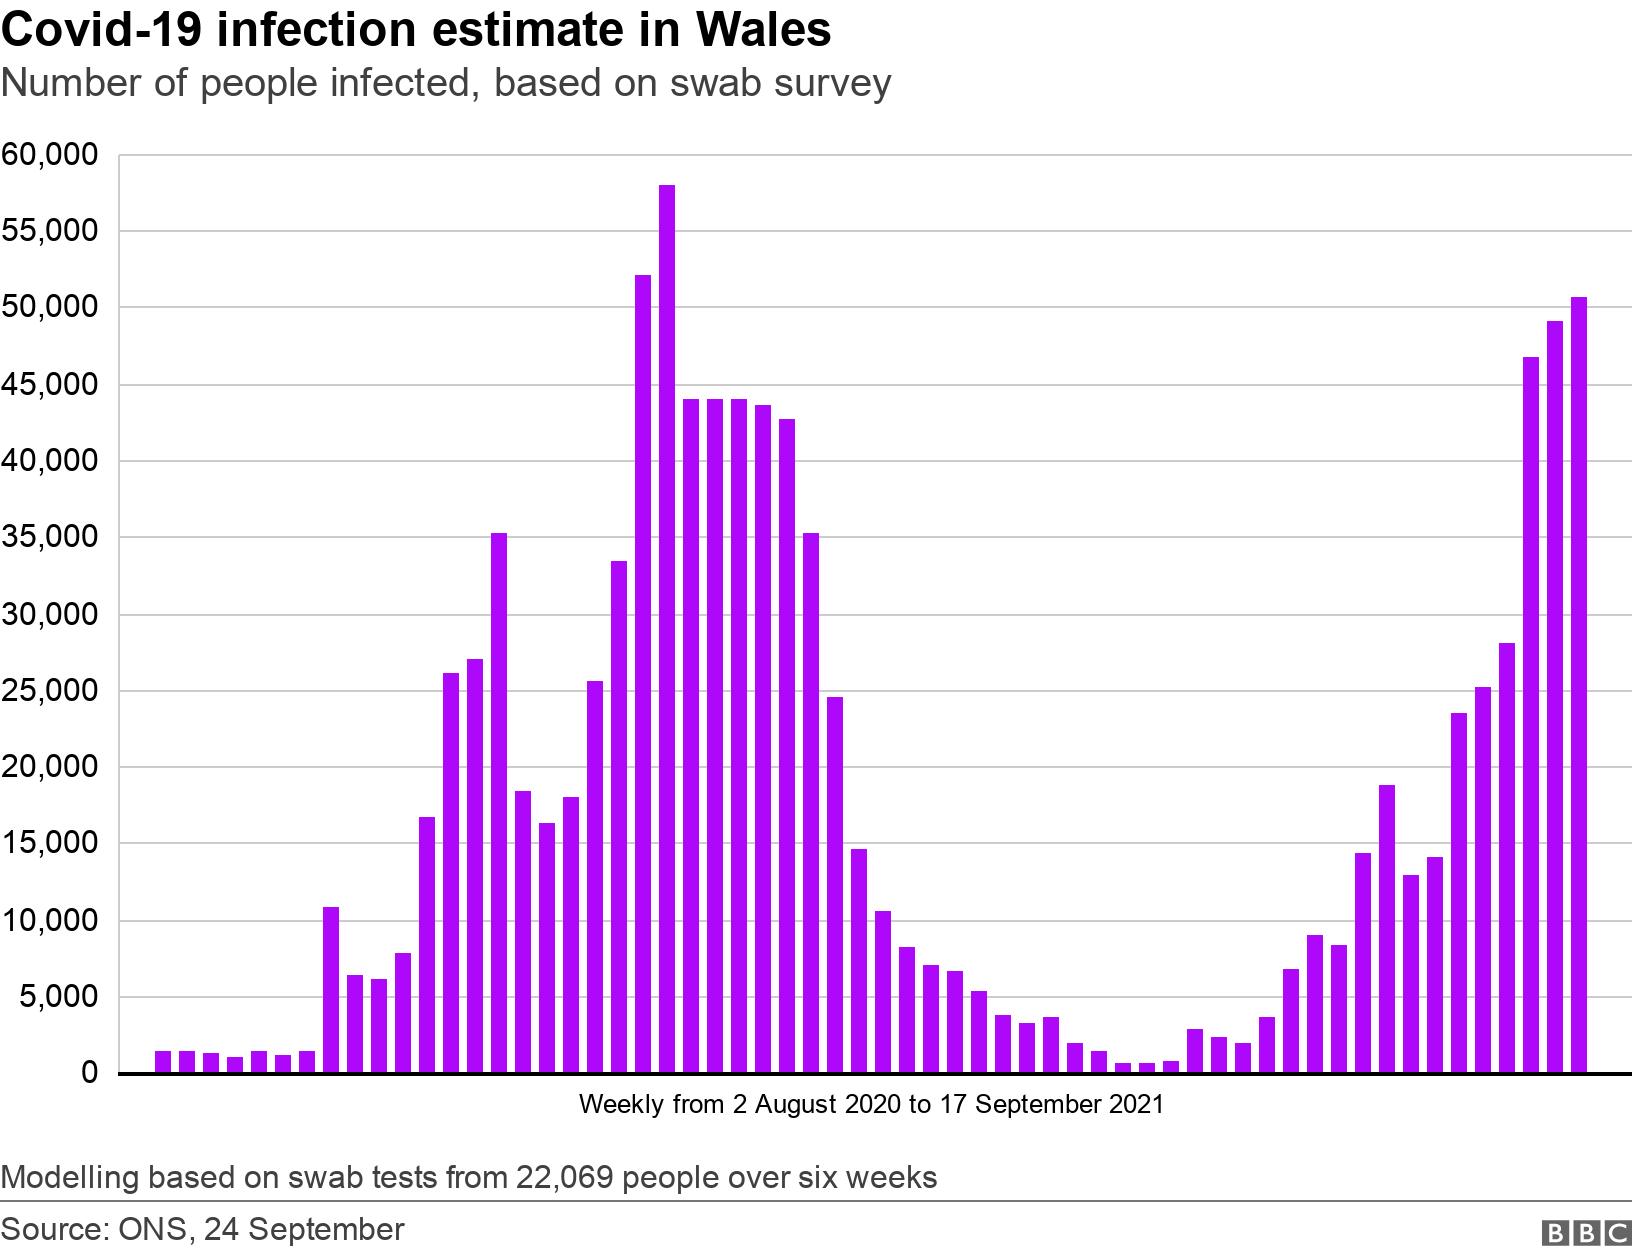 Covid-19 infection estimate in Wales. Number of people infected, based on swab survey.  Modelling based on swab tests from 22,069 people over six weeks.